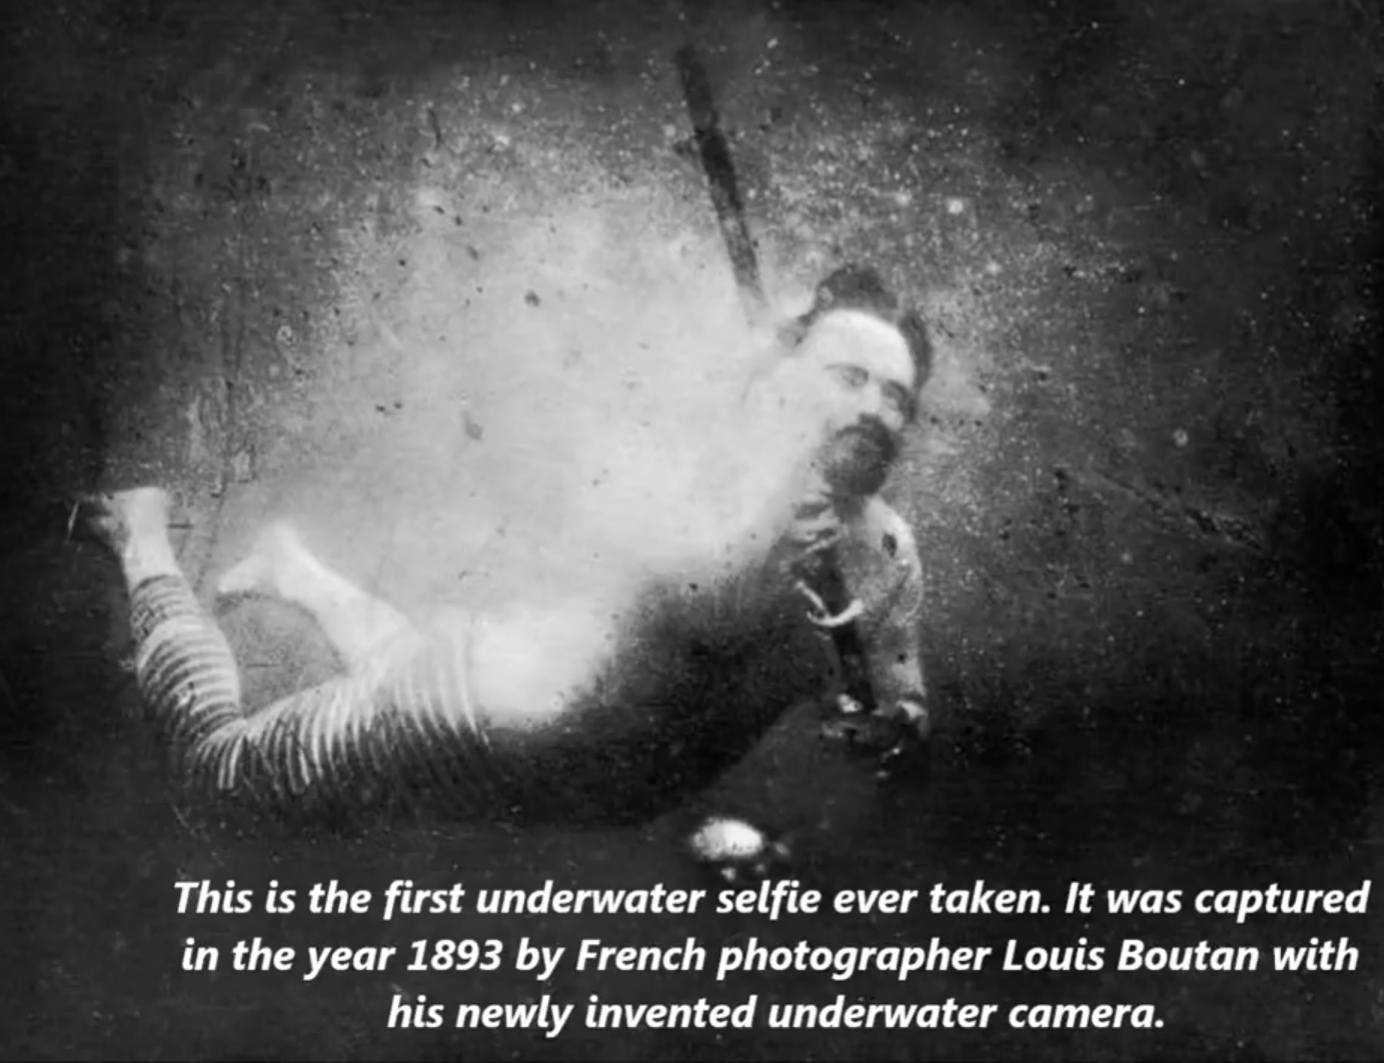 louis boutan - This is the first underwater selfie ever taken. It was captured in the year 1893 by French photographer Louis Boutan with his newly invented underwater camera.